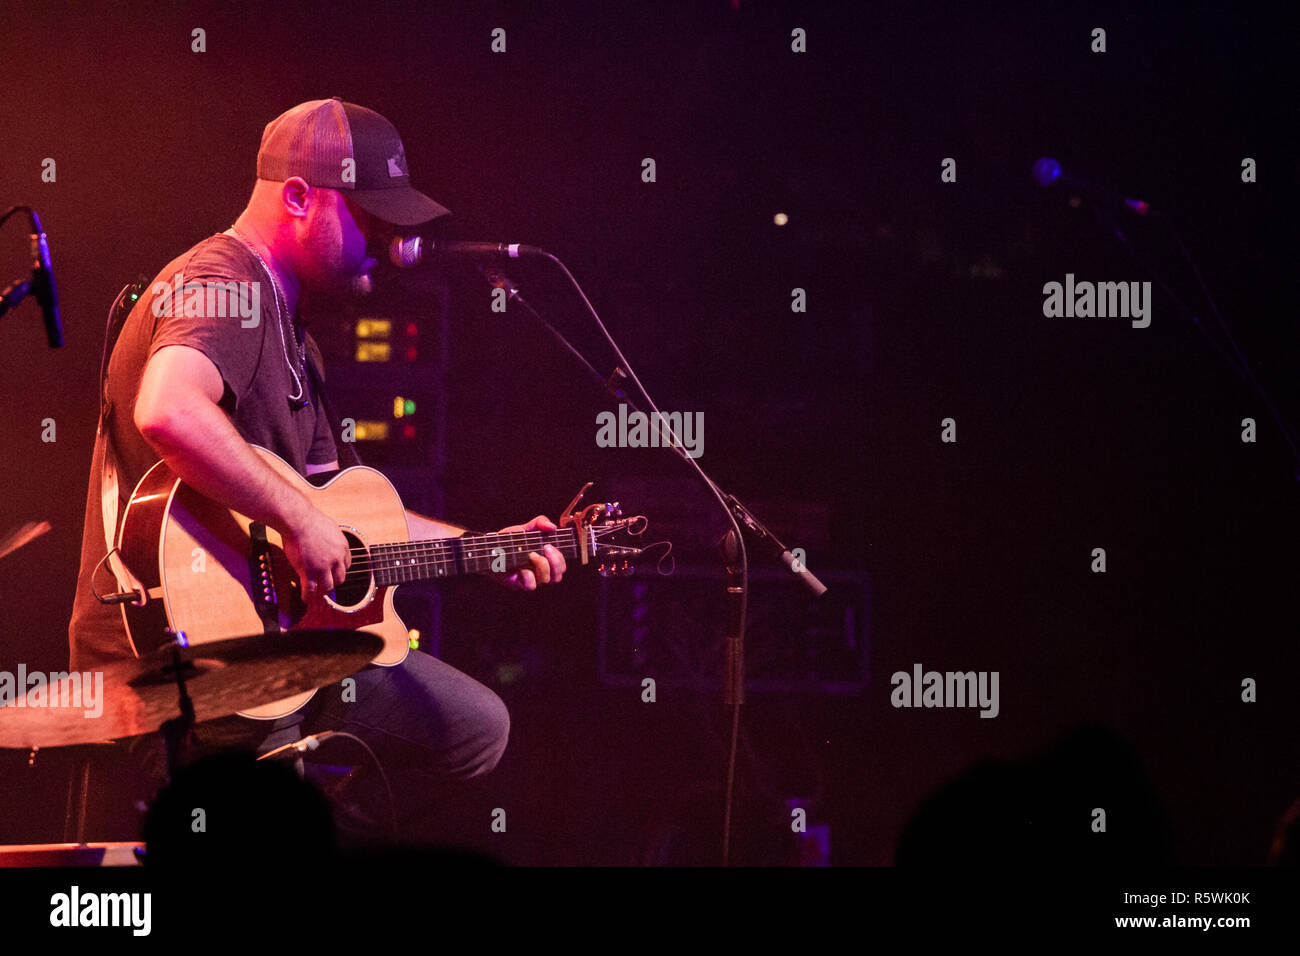 Aaron Goodvin seen performing at the Commodore Ballroom in Vancouver. 2018 Canadian Country Music Association Roots Artist/Group of the year, 2018 group of the year returned home to the Commodore Ballroom in Vancouver for their last show of their Canada worldwide tour with Nice Horse Rising Group and 2018 Songwriter of the year Aaron Goodvin. Stock Photo